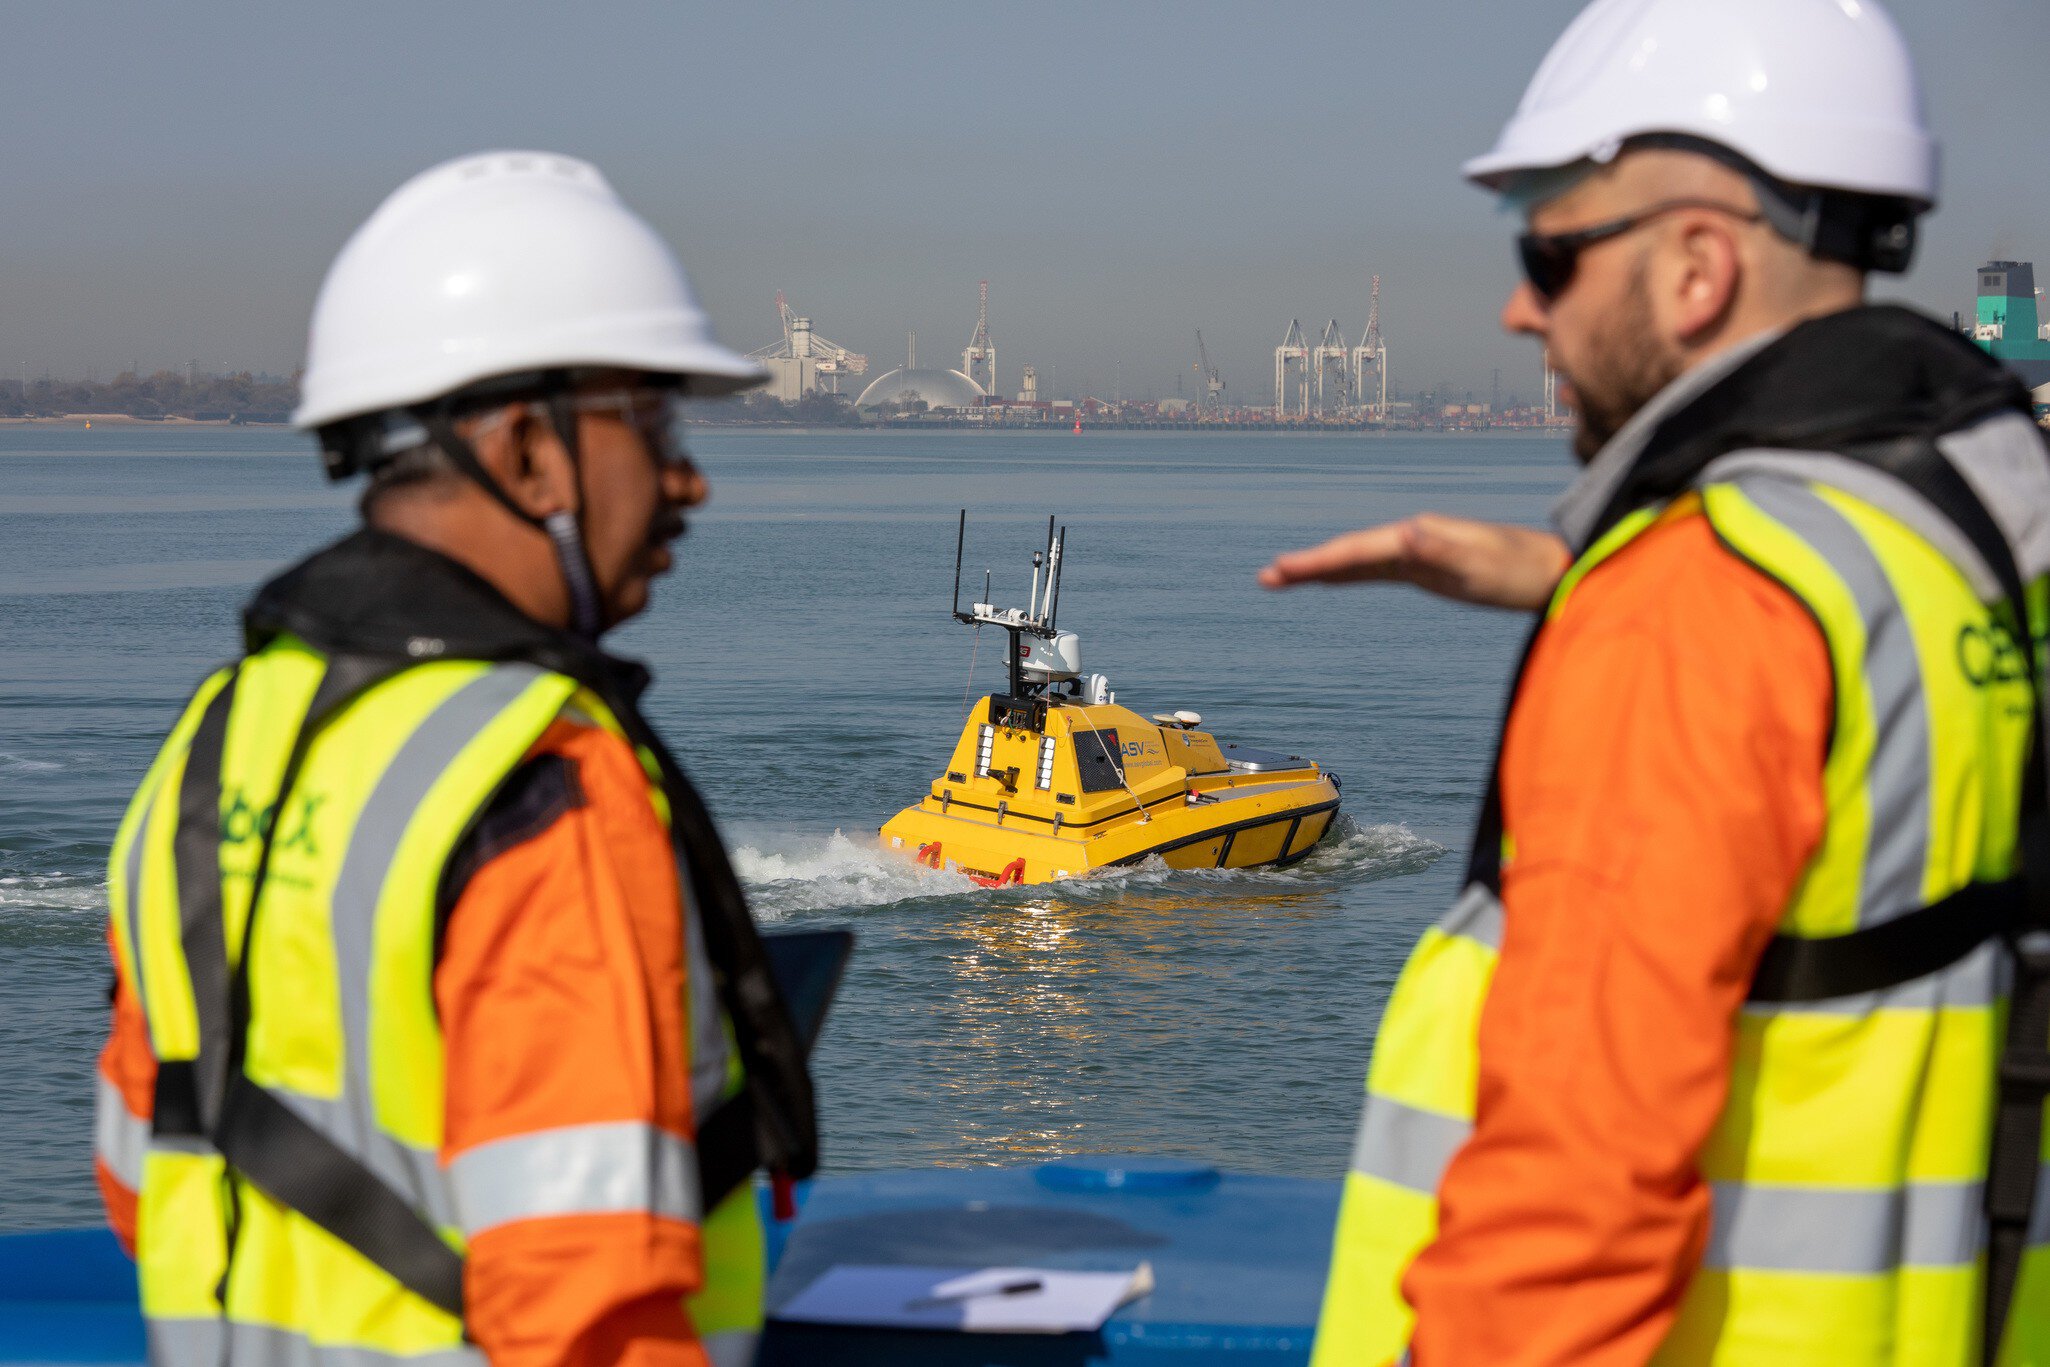 Staff from Fugro taking part in a practical training session in the operation of uncrewed surface vessels (USVs) on board the WillChallenge on Southampton Water.
-
Fugro Middle East personnel have completed the world's first Maritime Autonomous Surface Systems (MASS) professional certified training delivered by SeaBot XR at their training academy CEbotiX, the National Centre for Operational Excellence in Marine Robotics based in Southampton, UK.